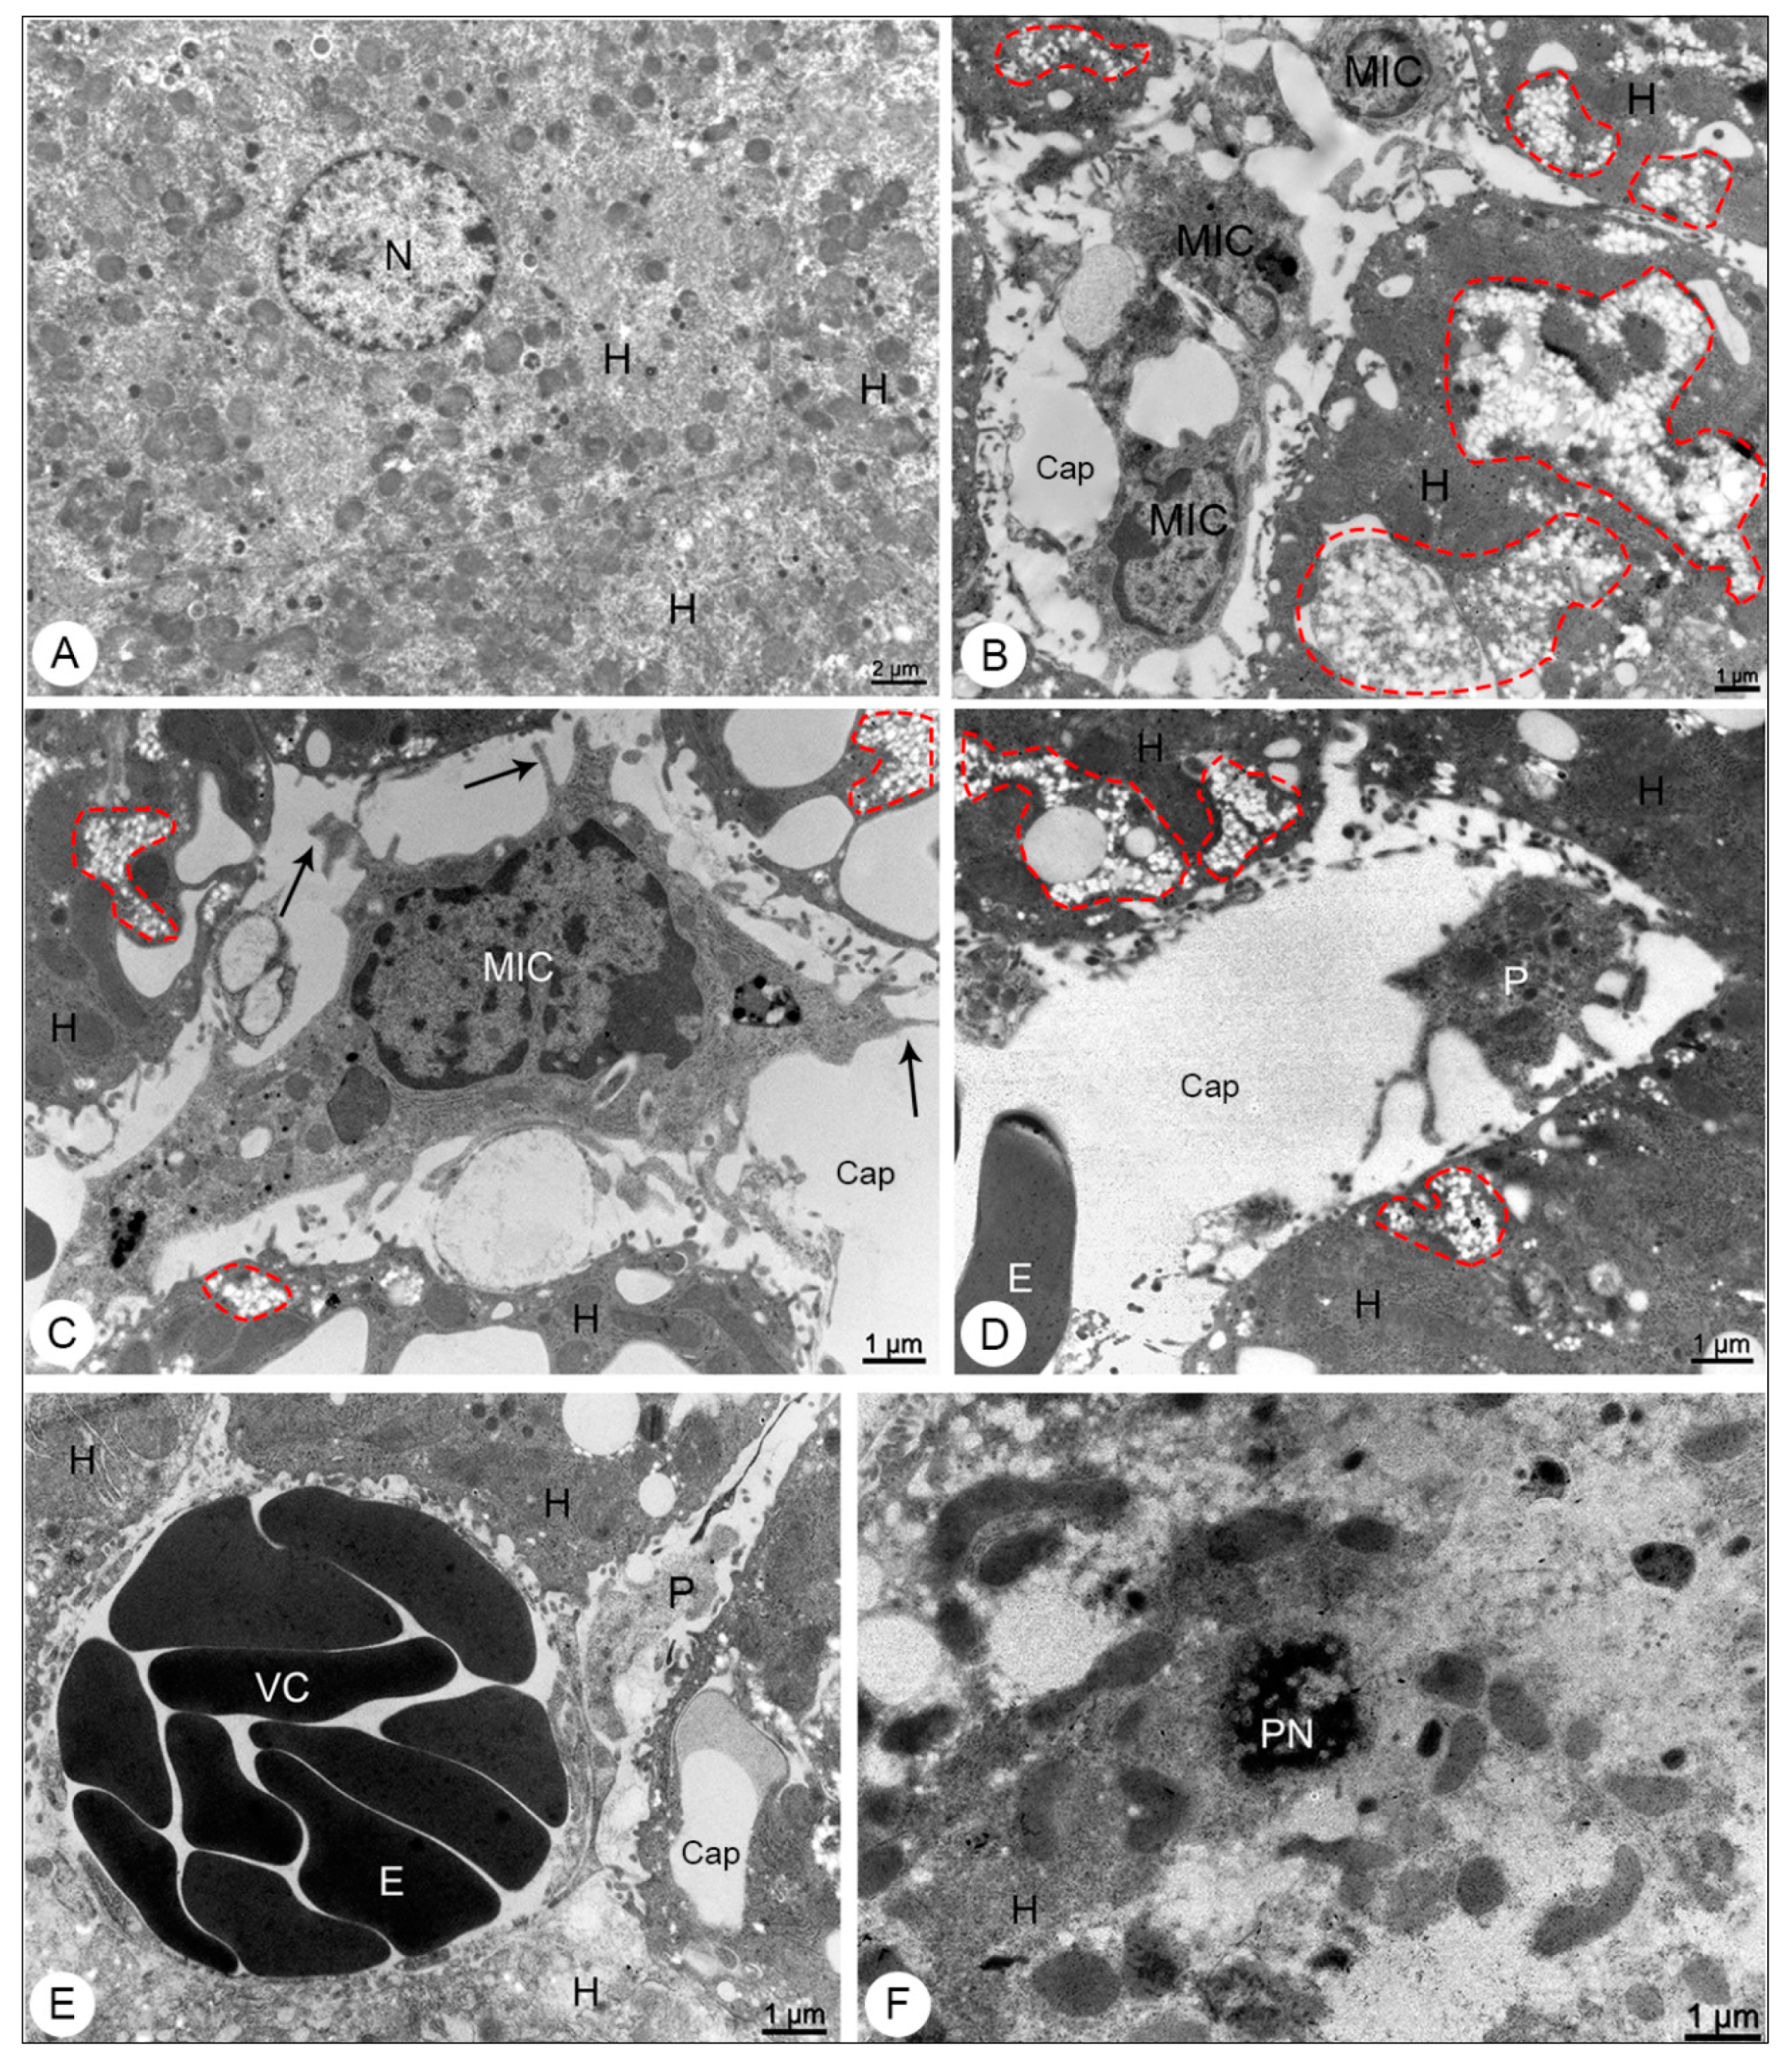 Viruses | Free Full-Text | Morphological Aspects and Viremia Analysis of  BALB/c Murine Model Experimentally Infected with Dengue Virus Serotype 4 |  HTML